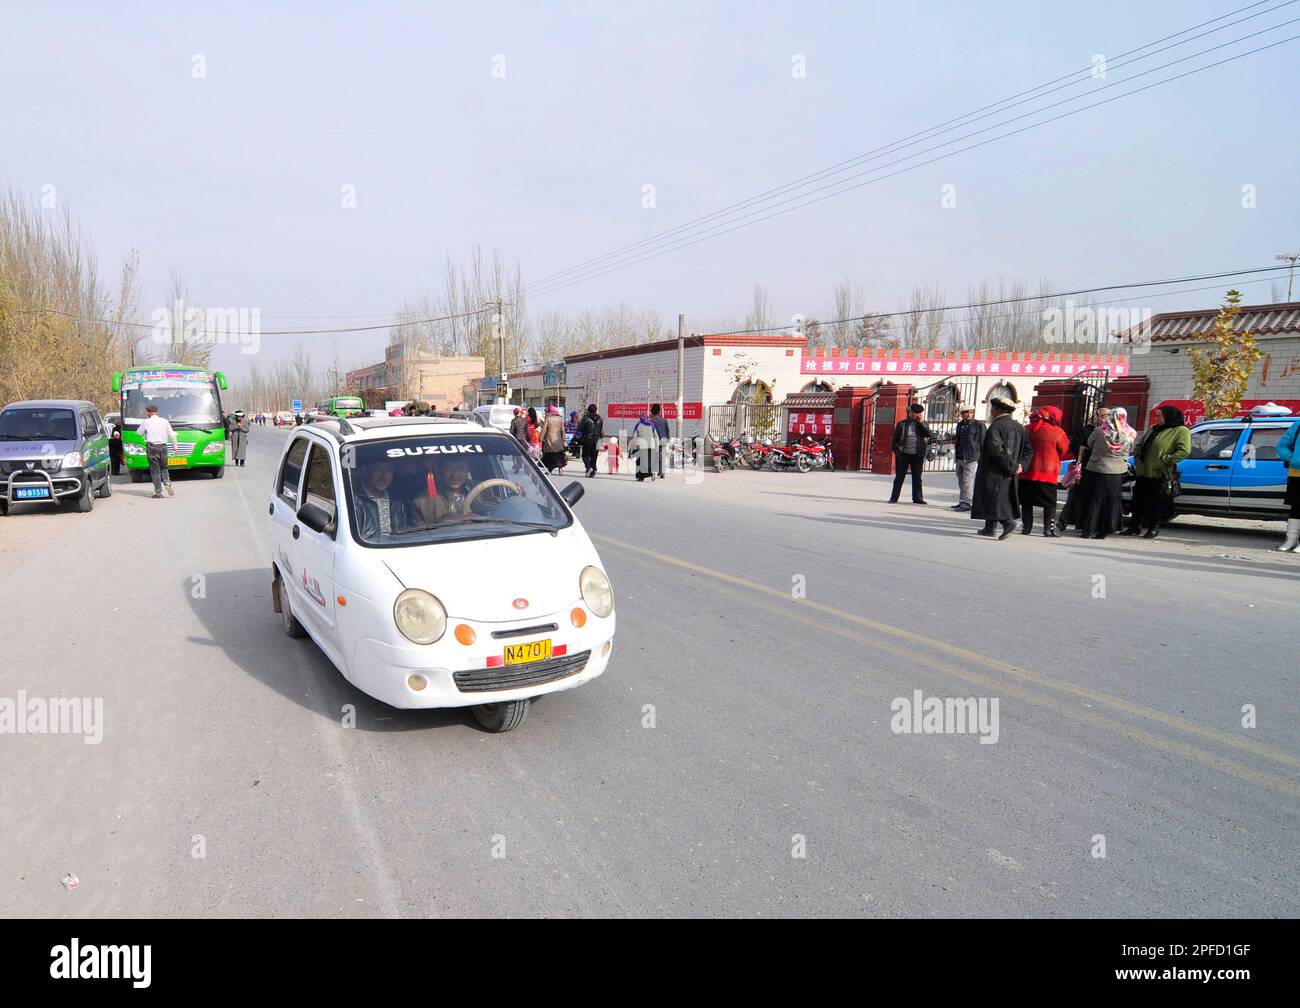 A Chinese Three Wheel Motorcycle for passengers is a common vehicle in rural China. Photo taken in Xinjiang, China. Stock Photo